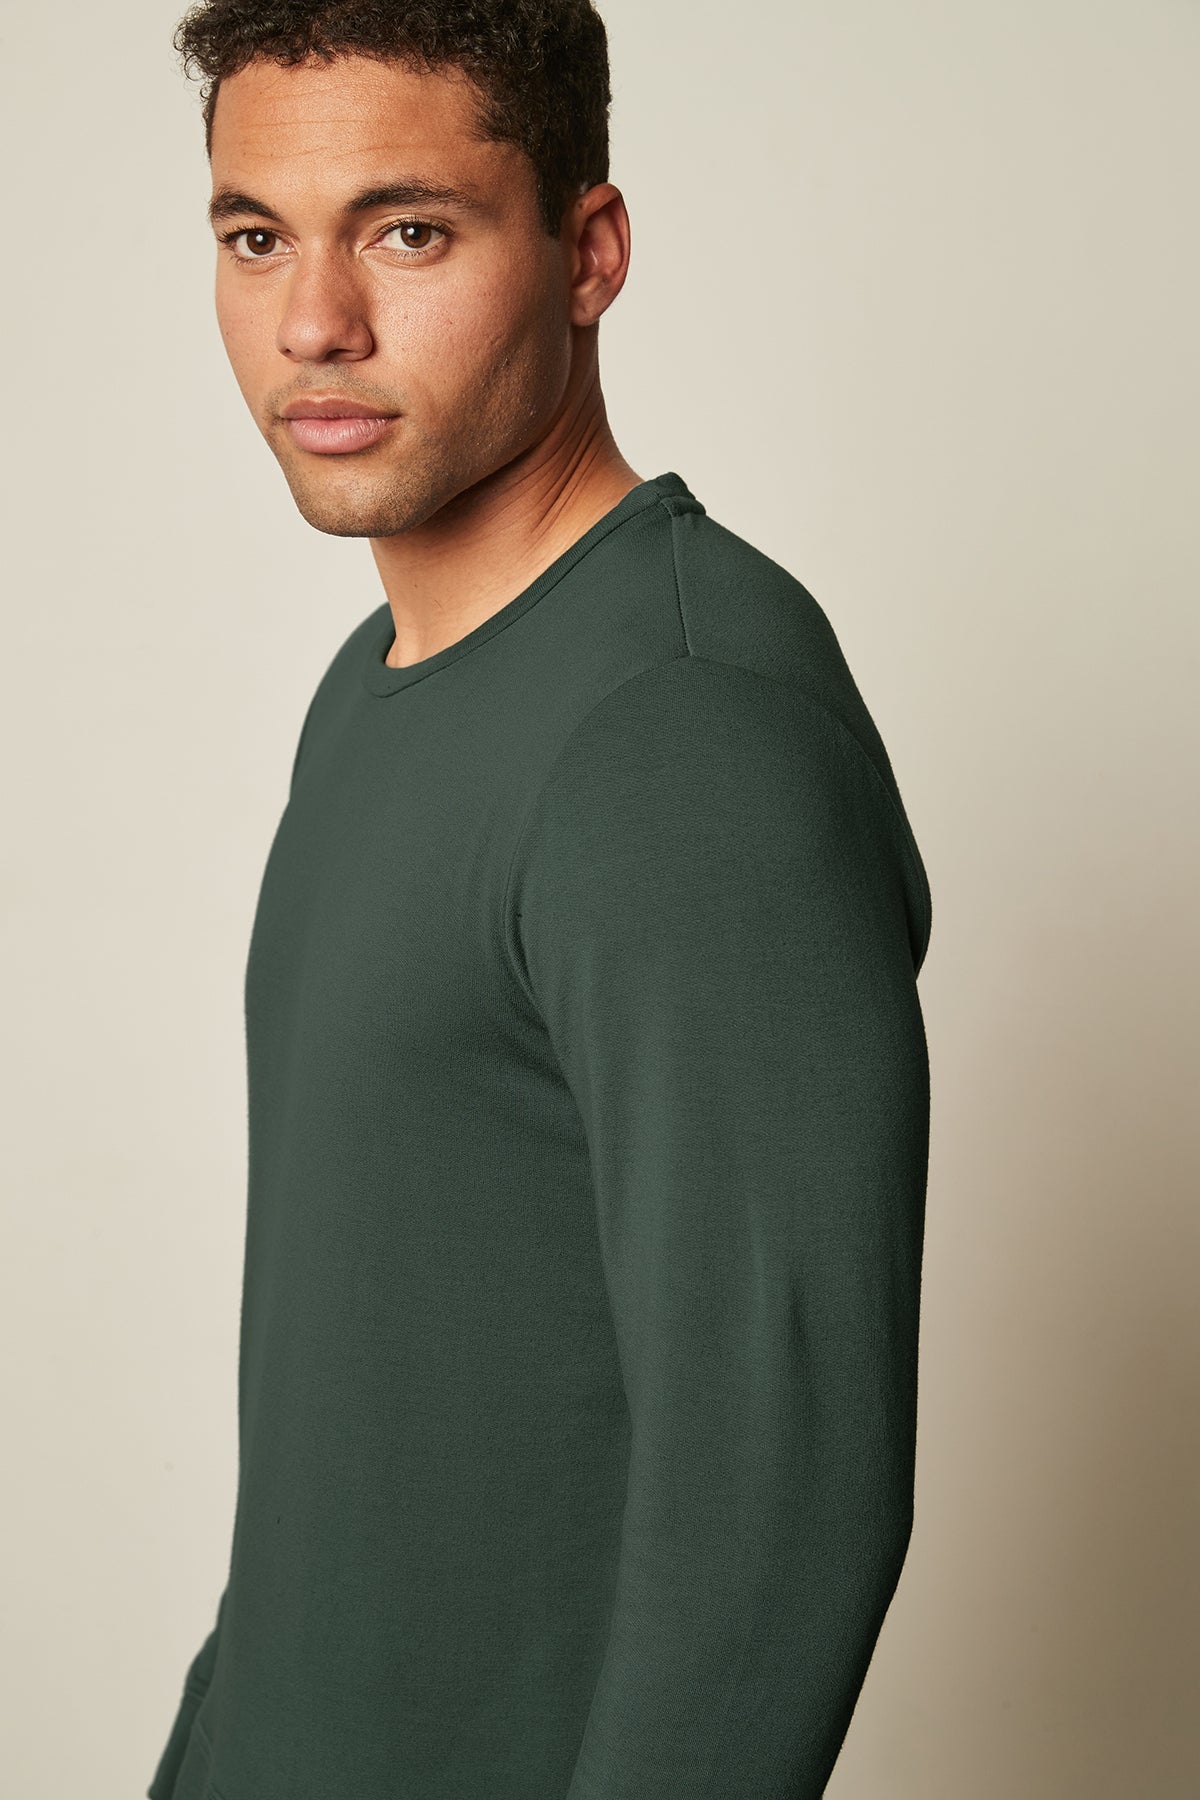 A green long-sleeved SOREN LUXE FLEECE PULLOVER-wearing man in soft and stretch workout Velvet by Graham & Spencer gear.-26632269988033